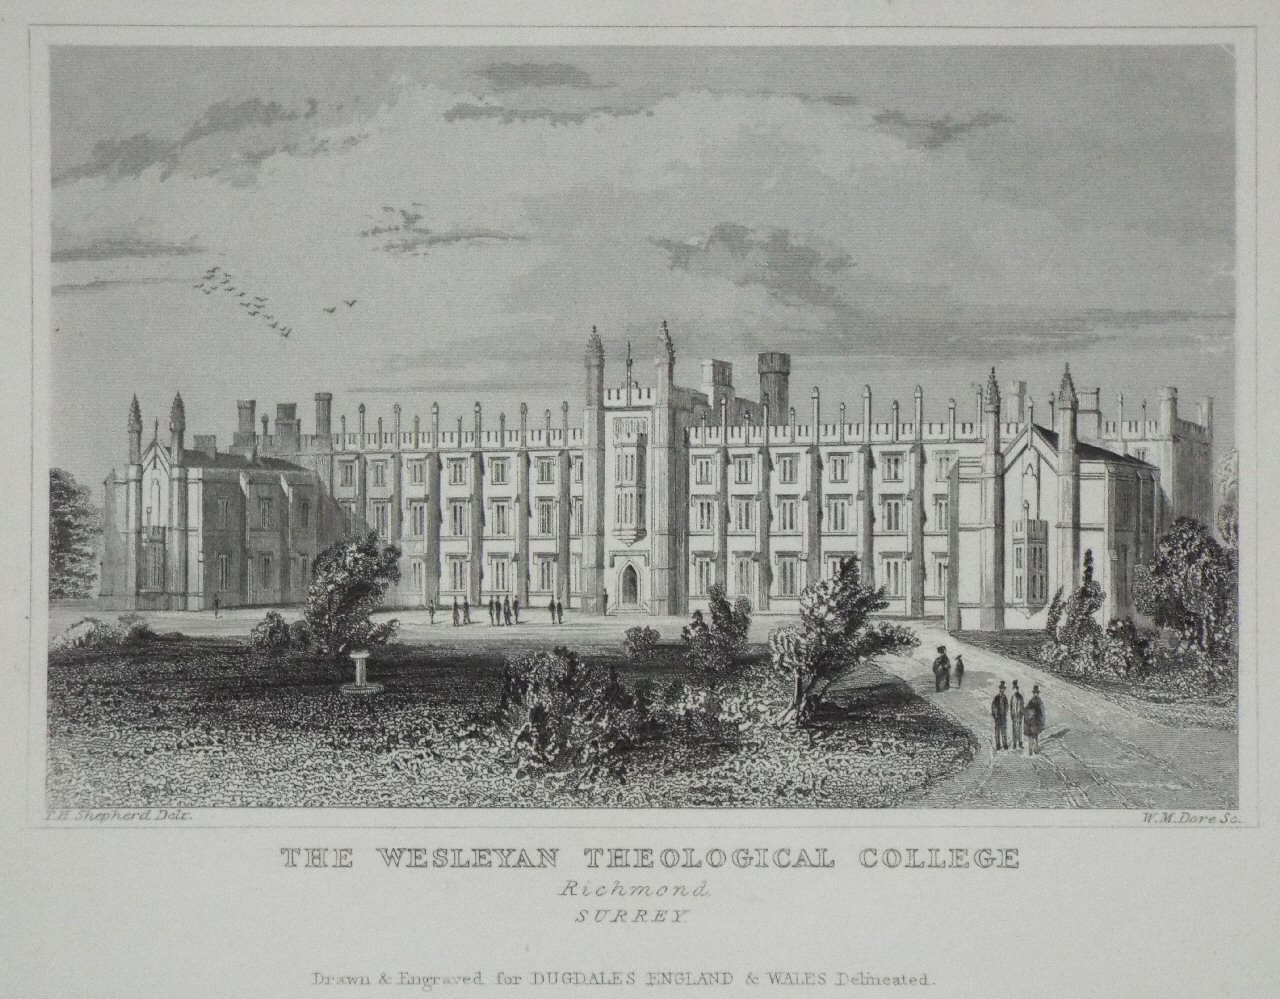 Print - The Wesleyan Theological College Richmond Surrey. - Dore